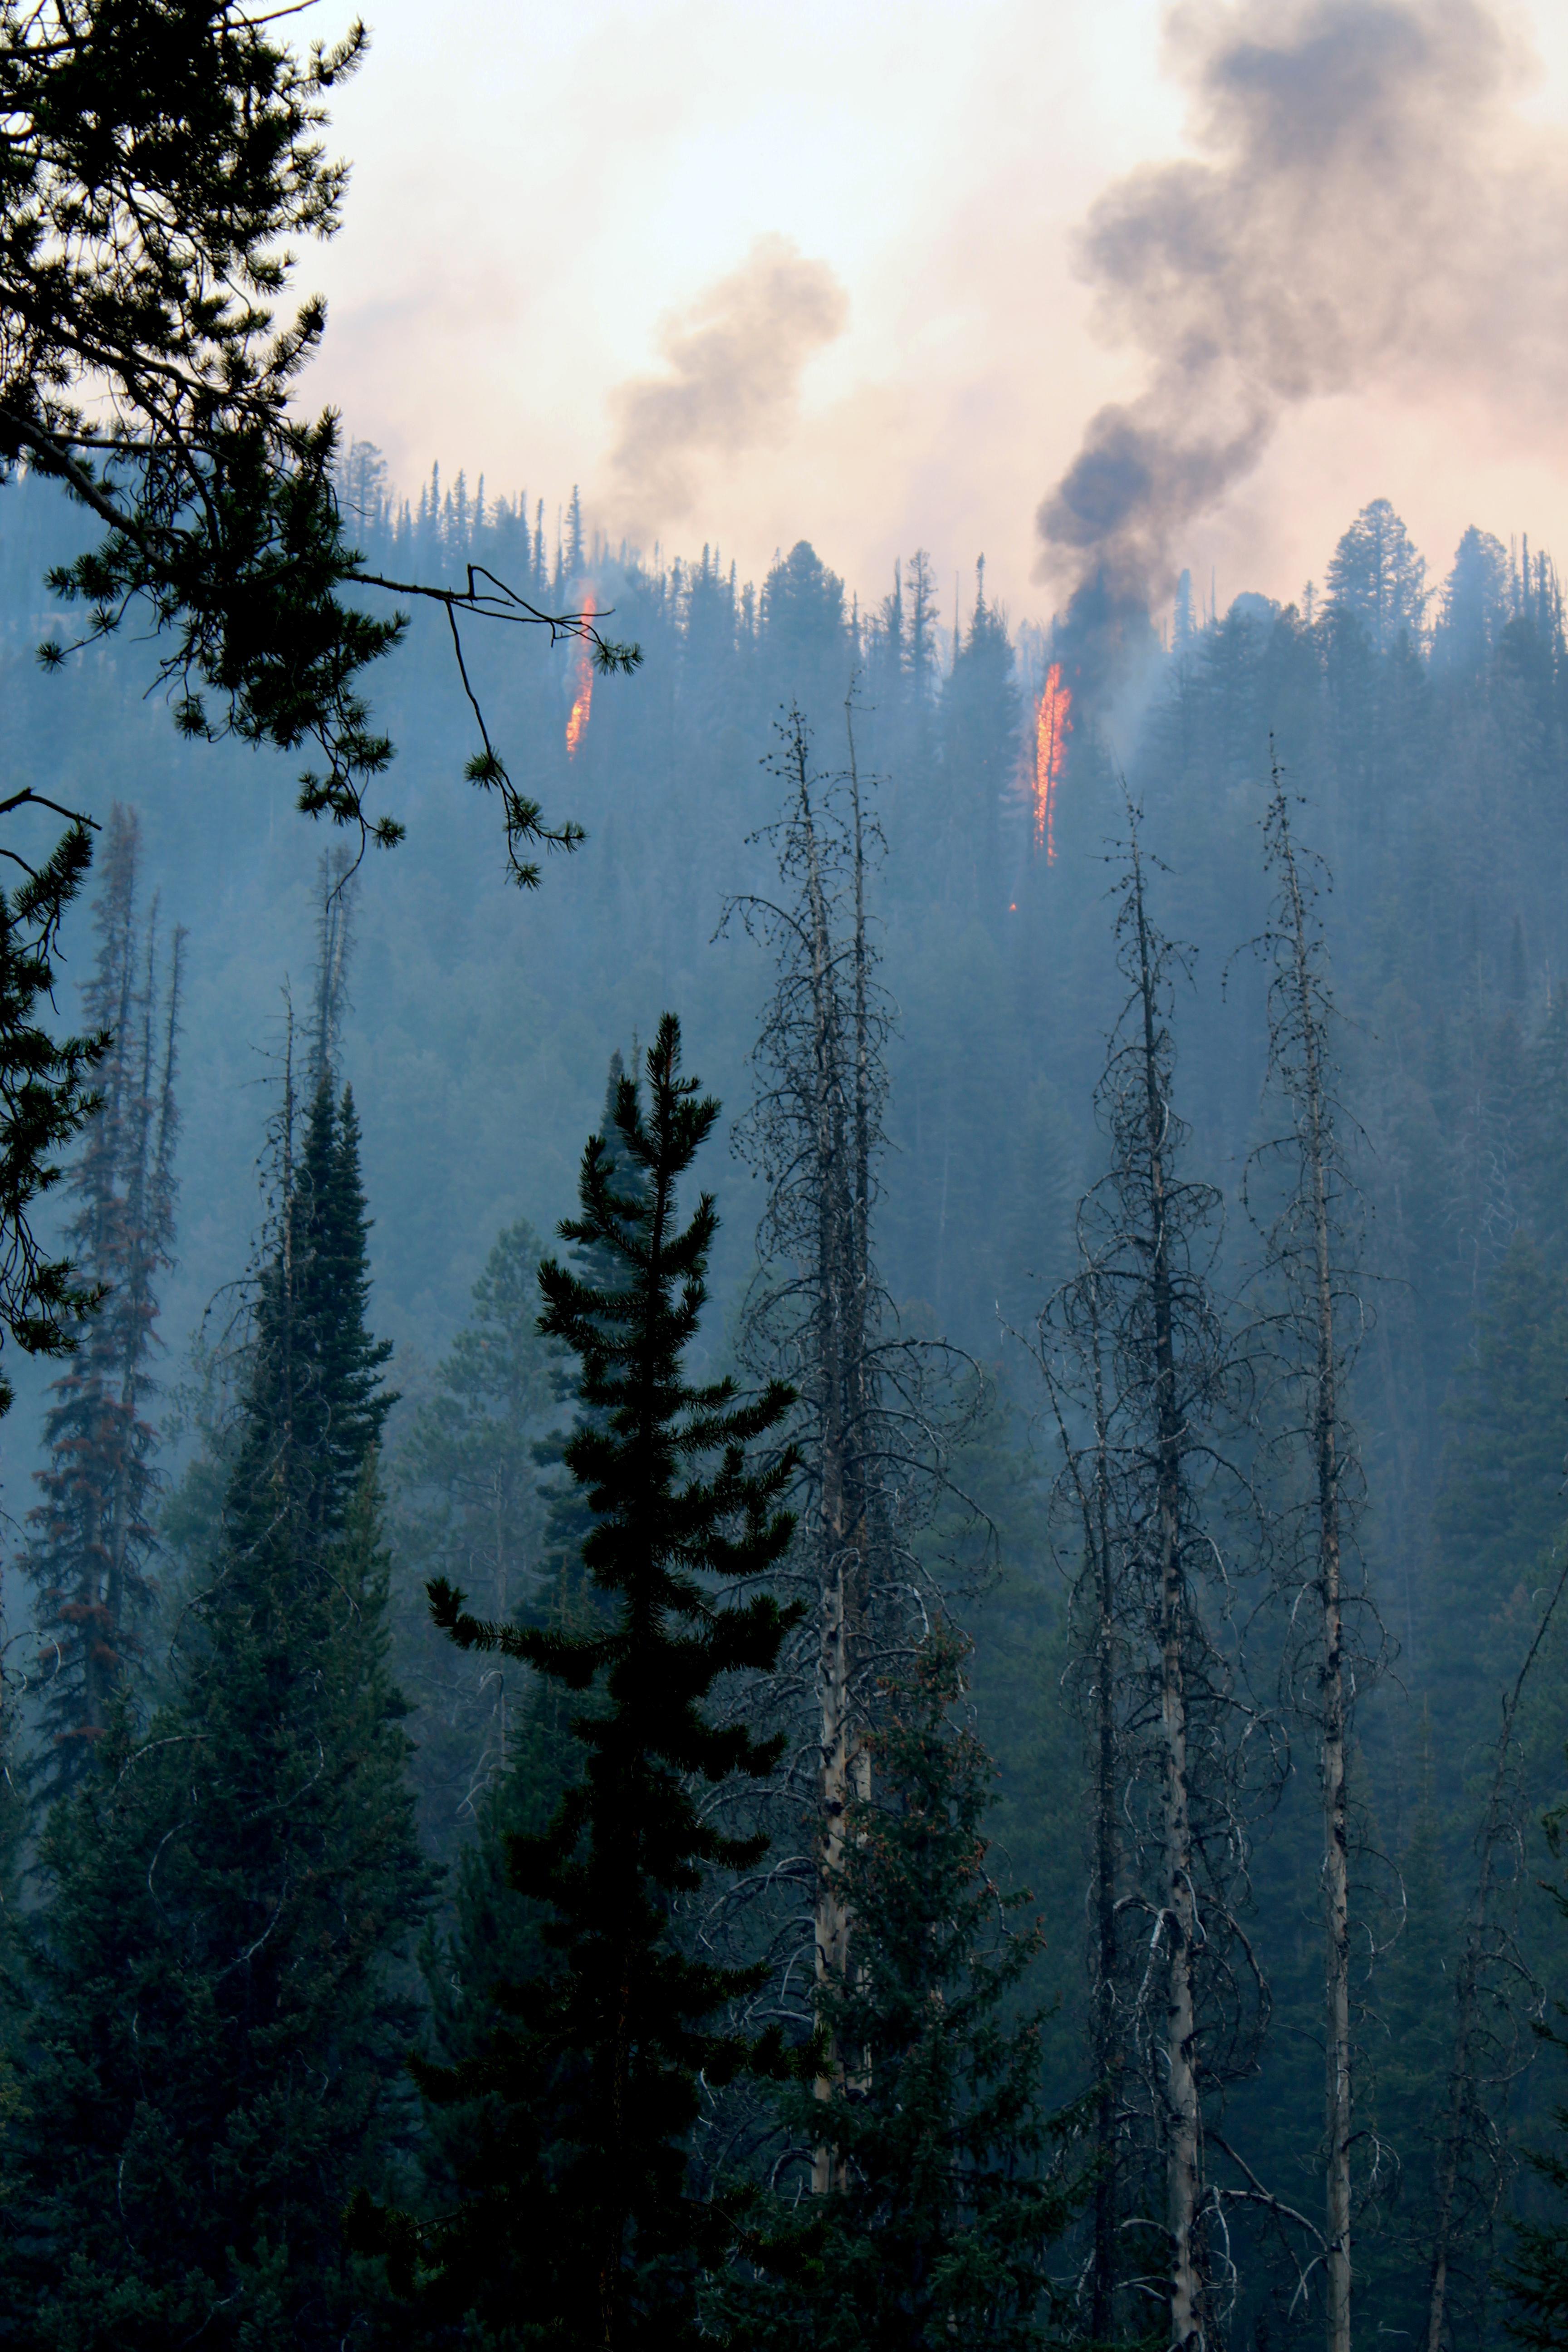 Individual trees torch into flames on slope